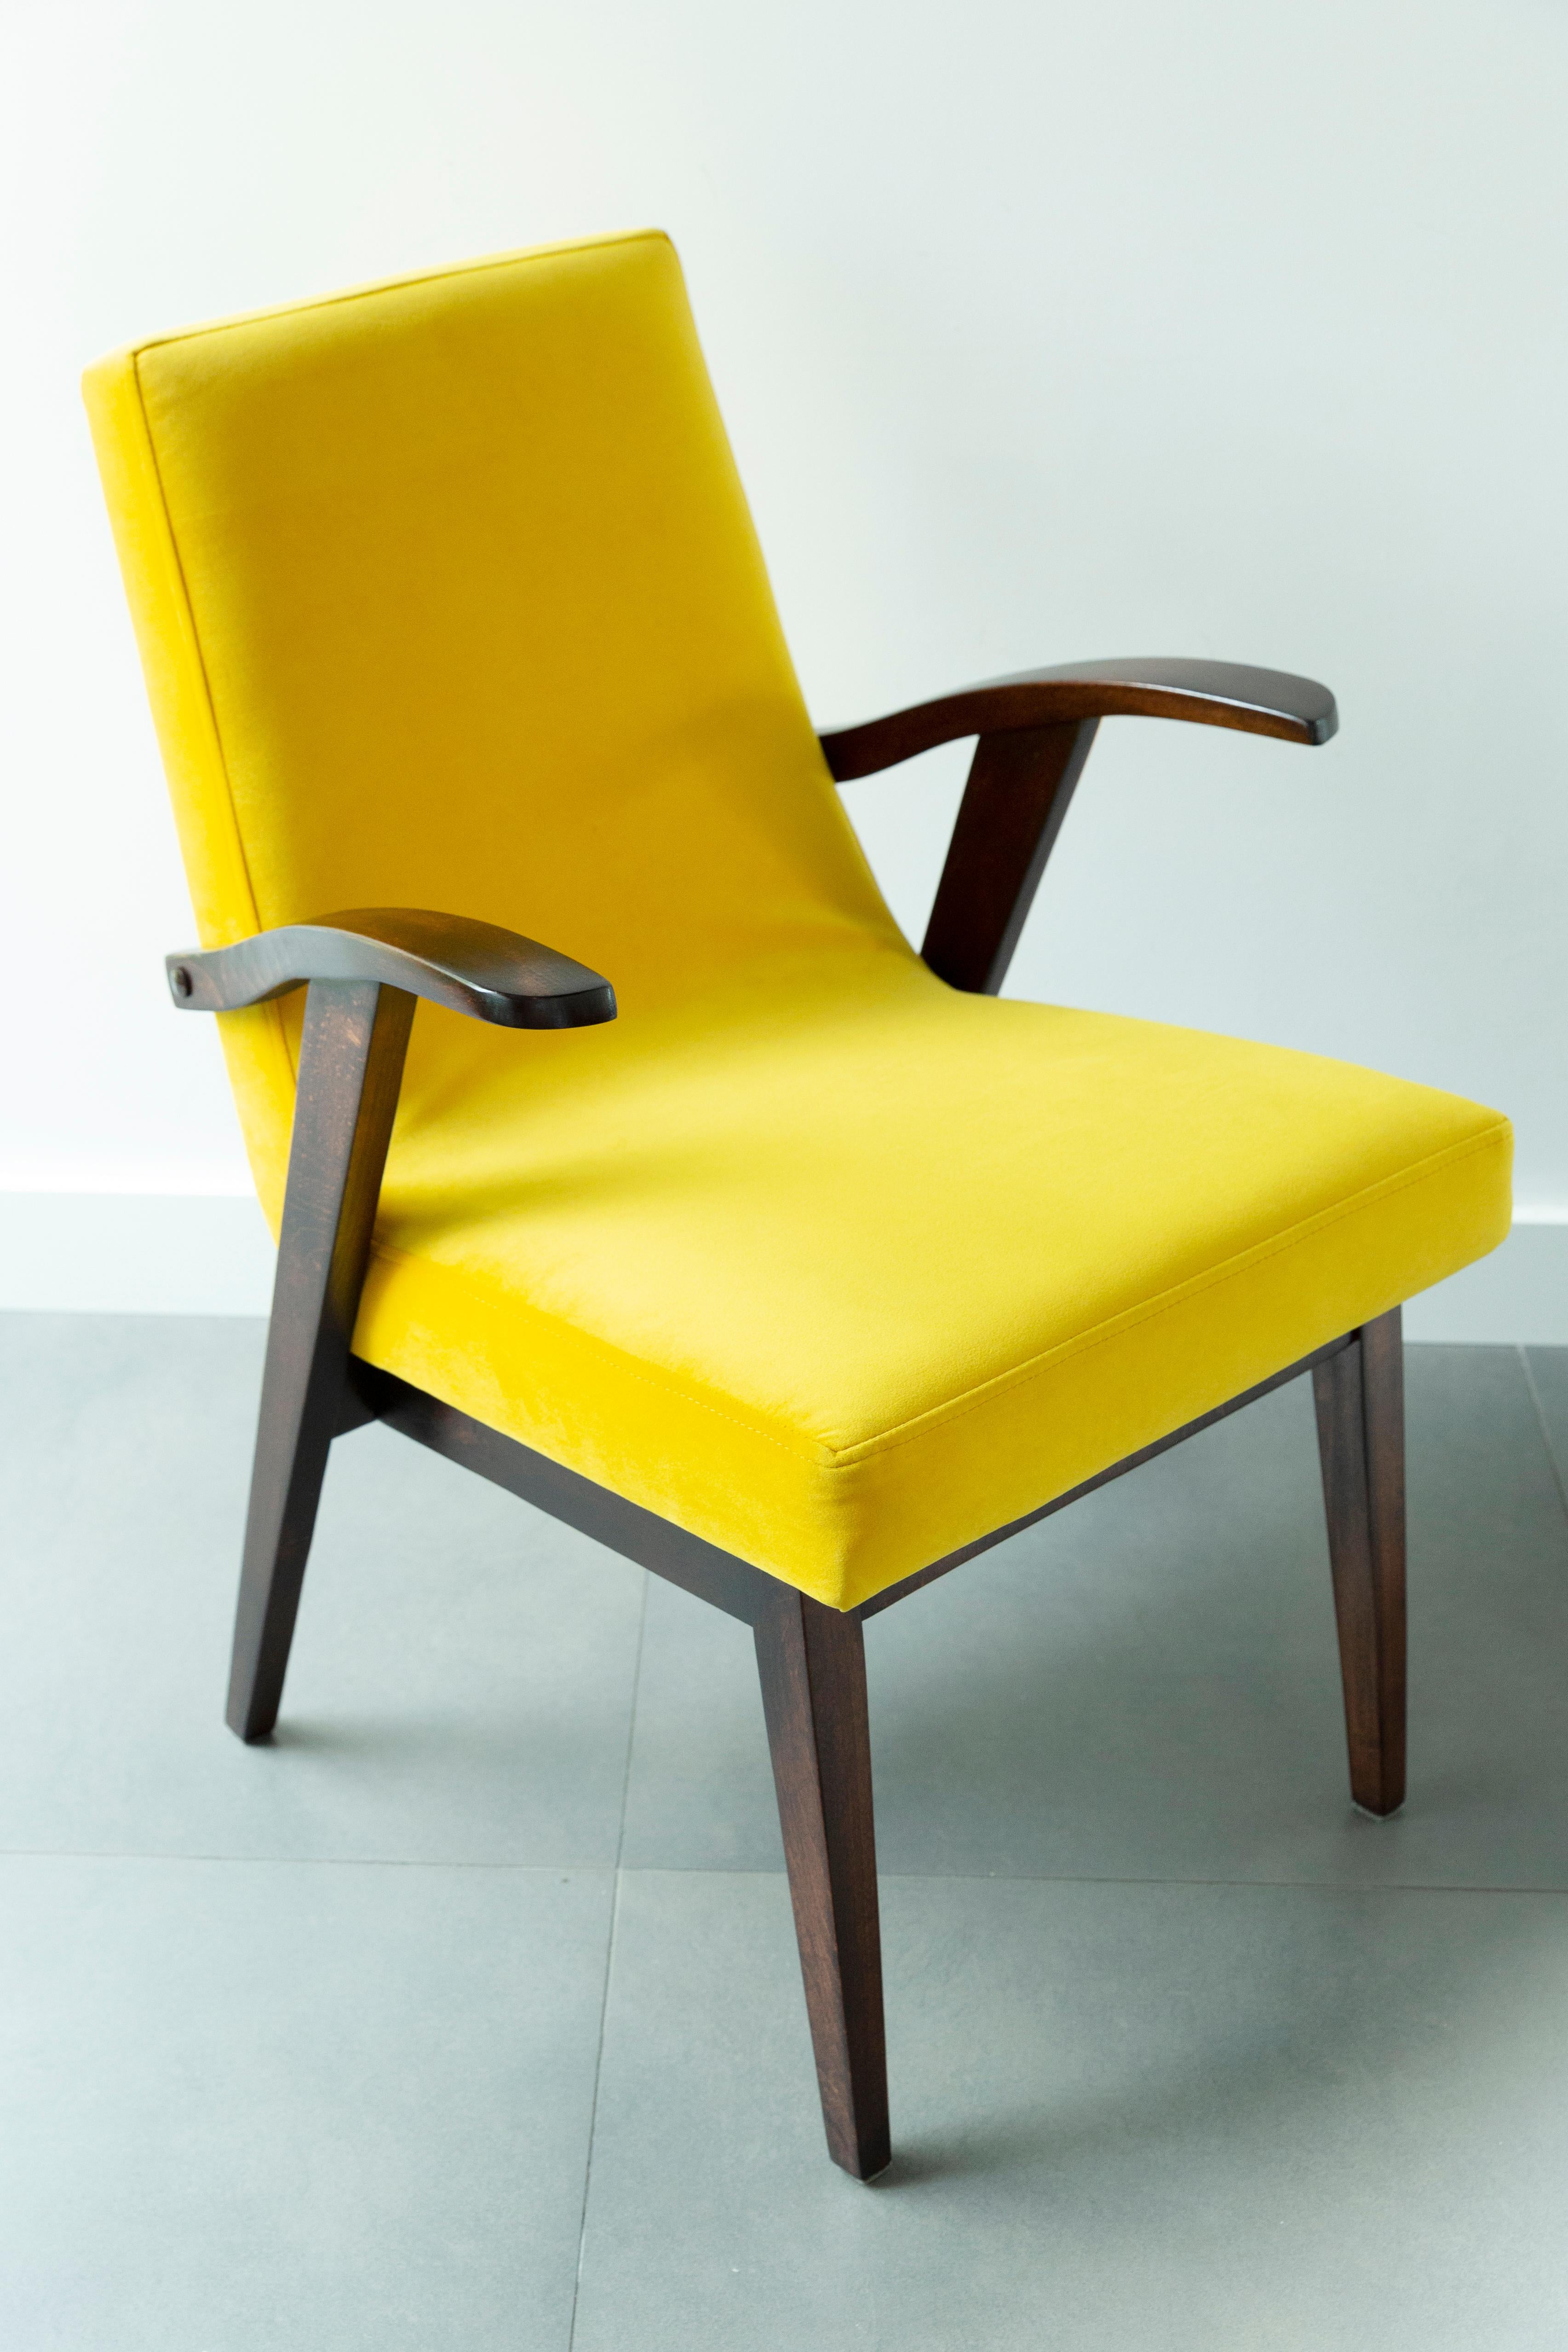 Textile Set of Four Vintage Chairs in Yellow Velvet by Mieczyslaw Puchala, 1960s For Sale